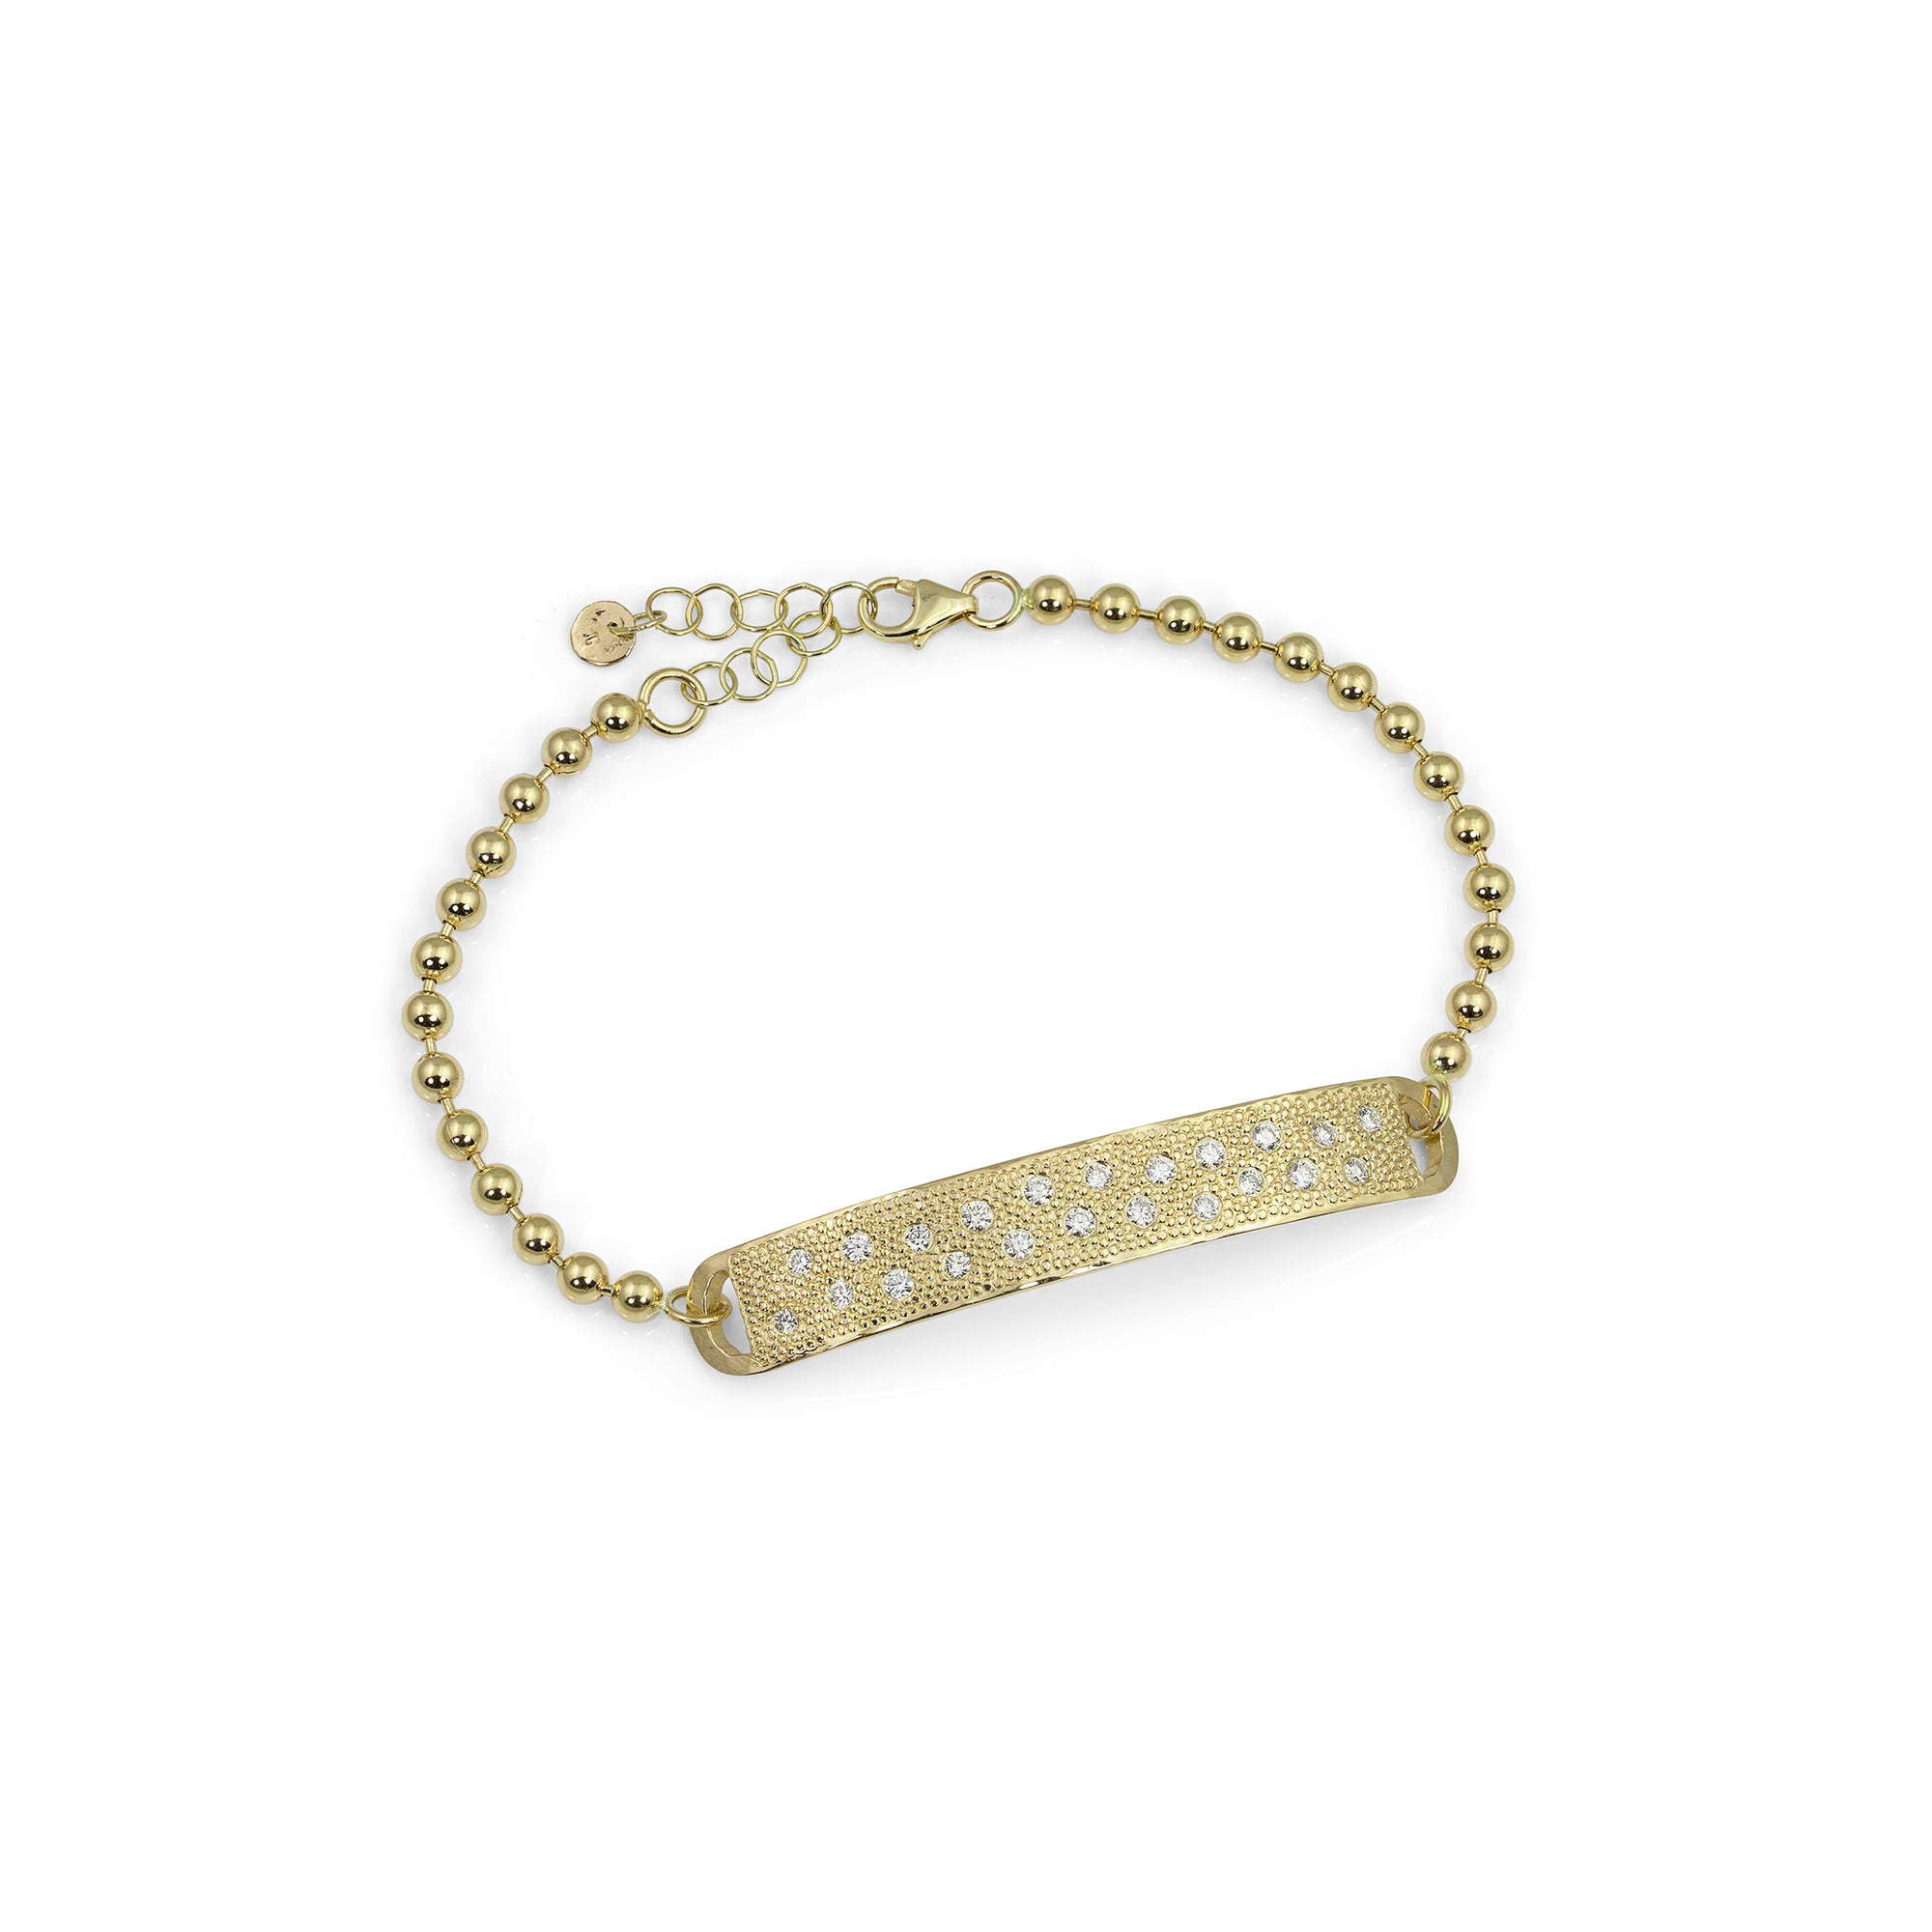 14k yellow gold SOMA bar bracelet with scattered diamonds and 3.0mm ball link chain